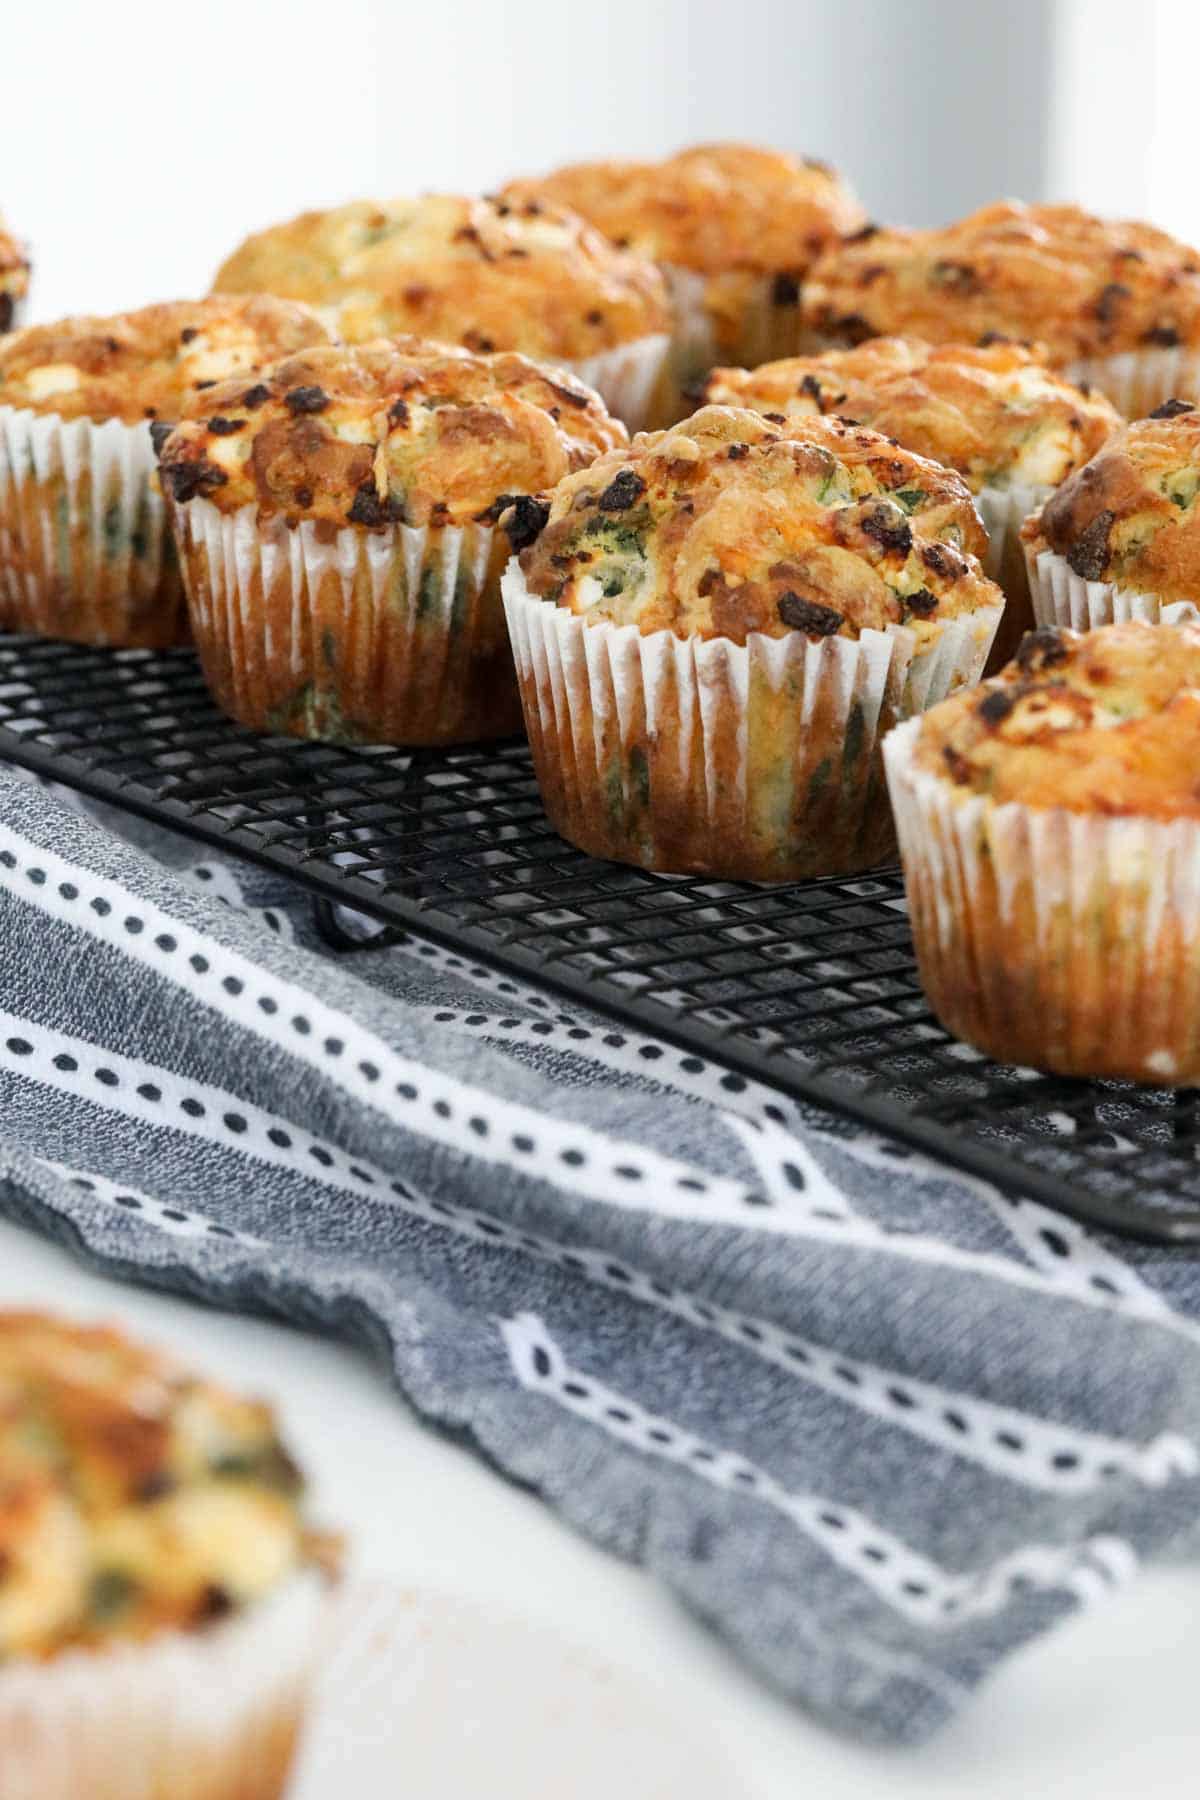 Baked feta and spinach muffins on a cooling rack.